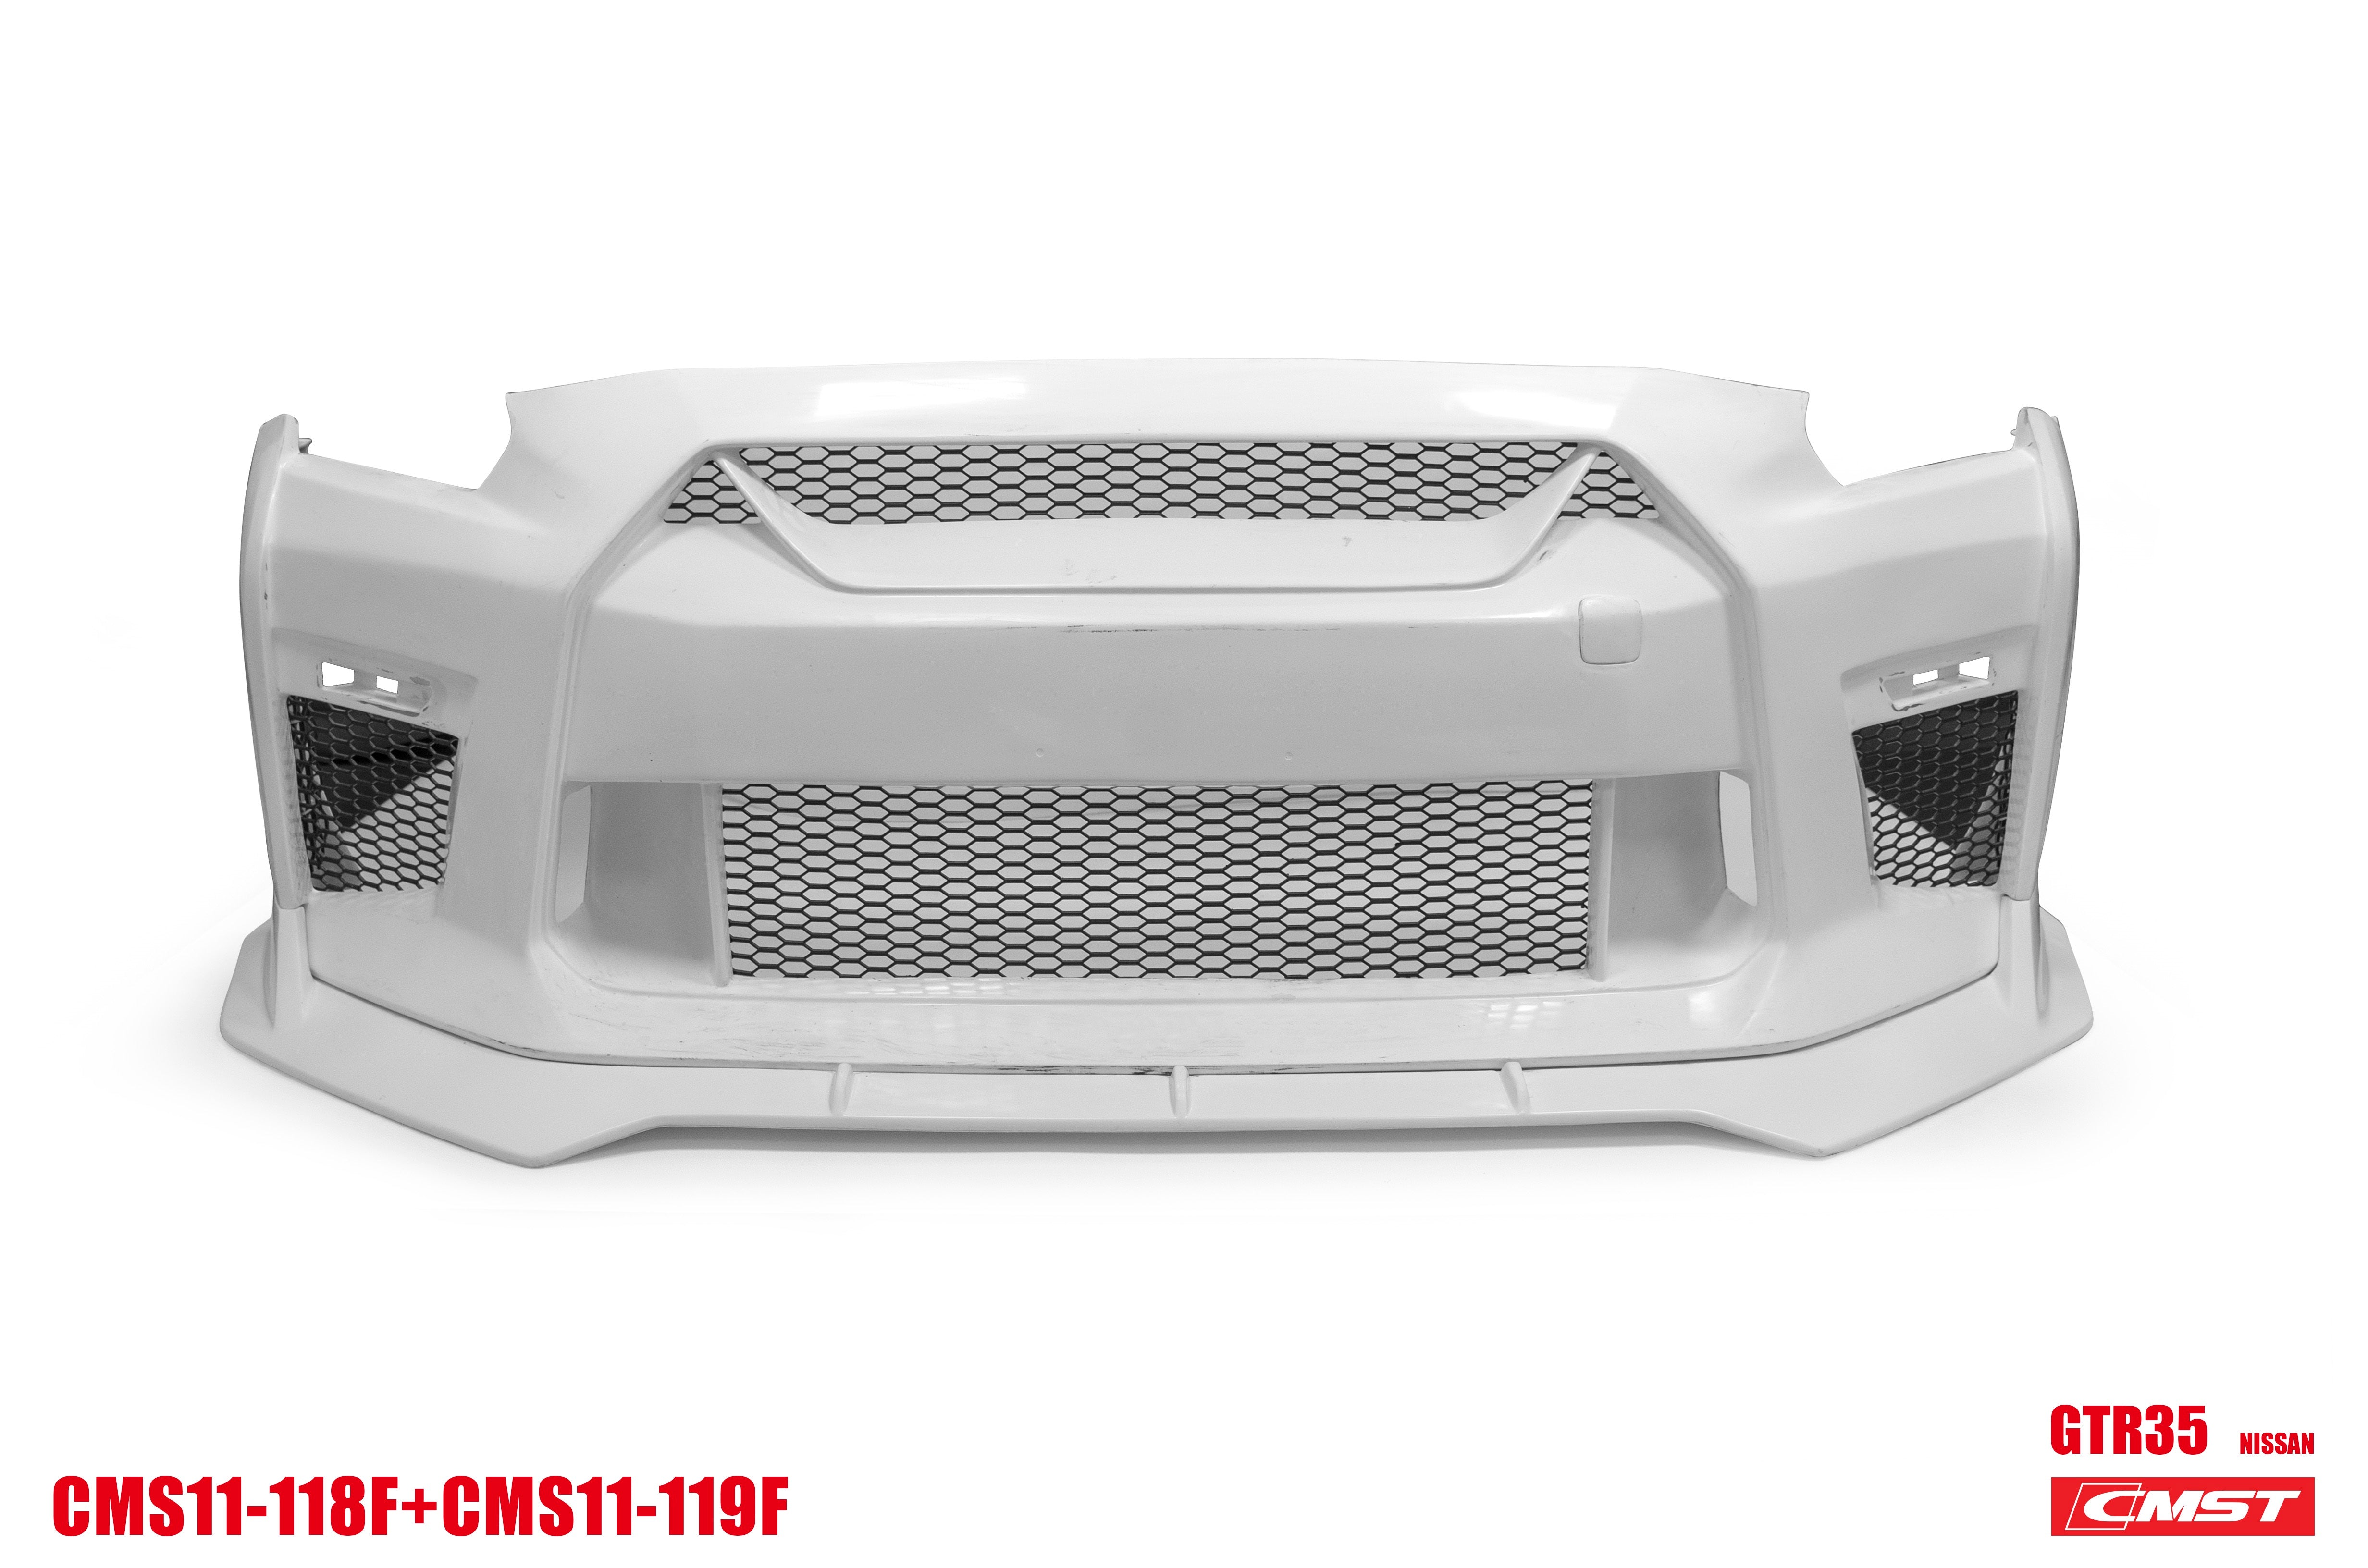 CMST Tuning Stage 2 Front Bumper & Front Lip for Nissan GTR GT-R R35 2008-2016 Facelift Conversion Kit